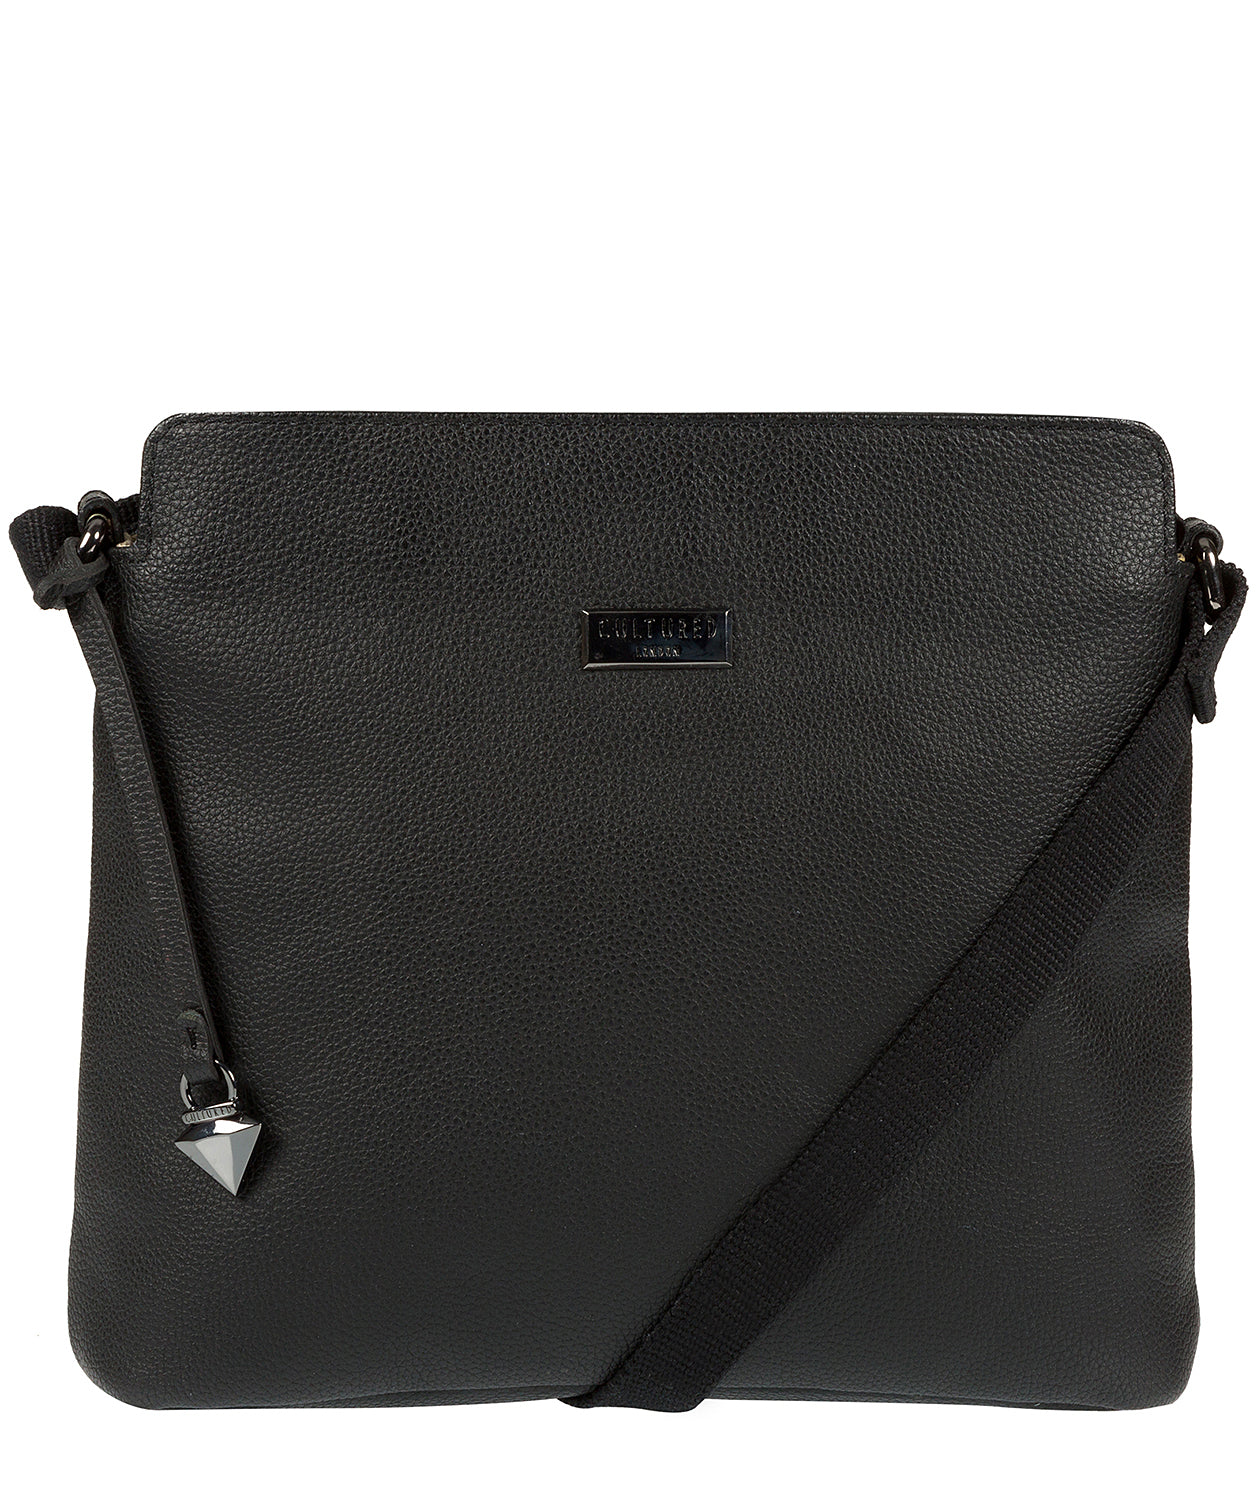 Black Leather Shoulder Bag 'Solair' by Cultured London – Pure Luxuries ...